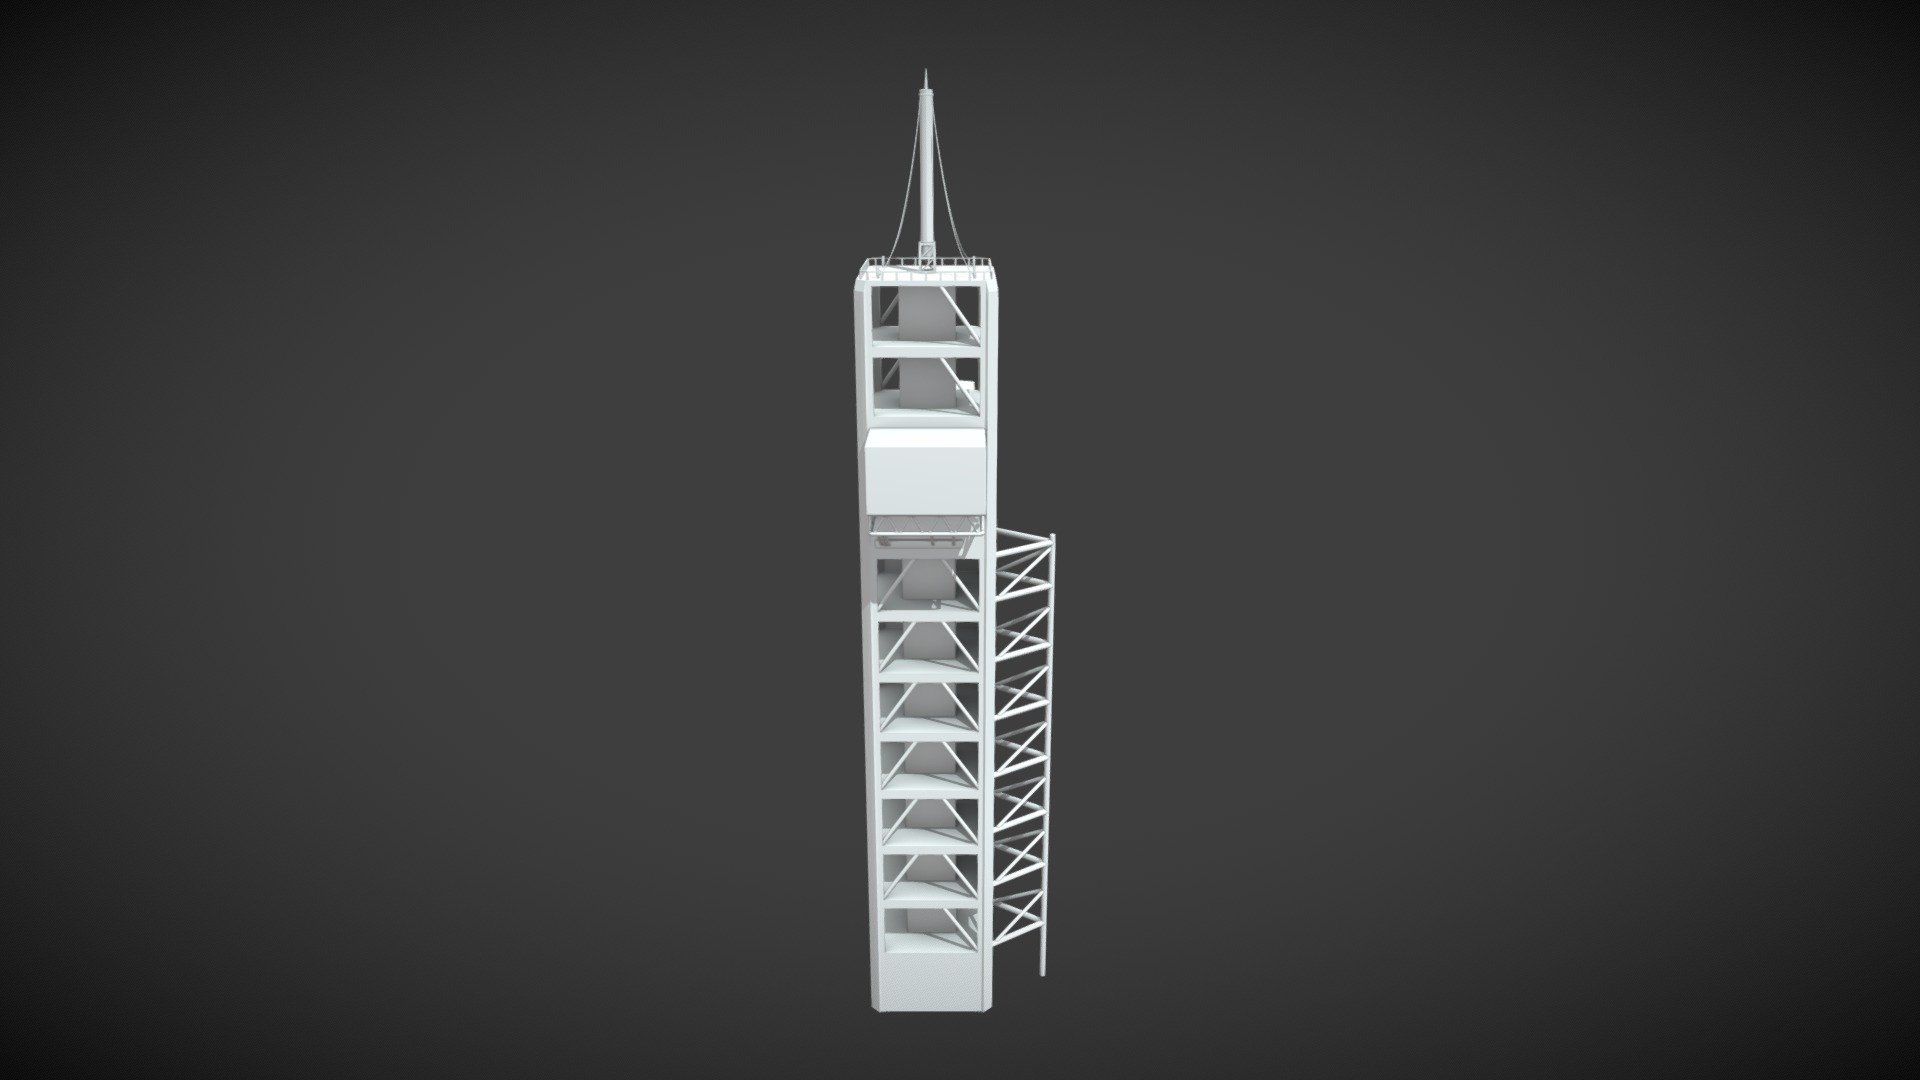 A rocket and it's launch pad (inspired by the SpaceX Falcon 9 and the Crew Dragon on it) - Mini-scene 02 : A rocket and it's launch pad - 3D model by Qantzz 3d model